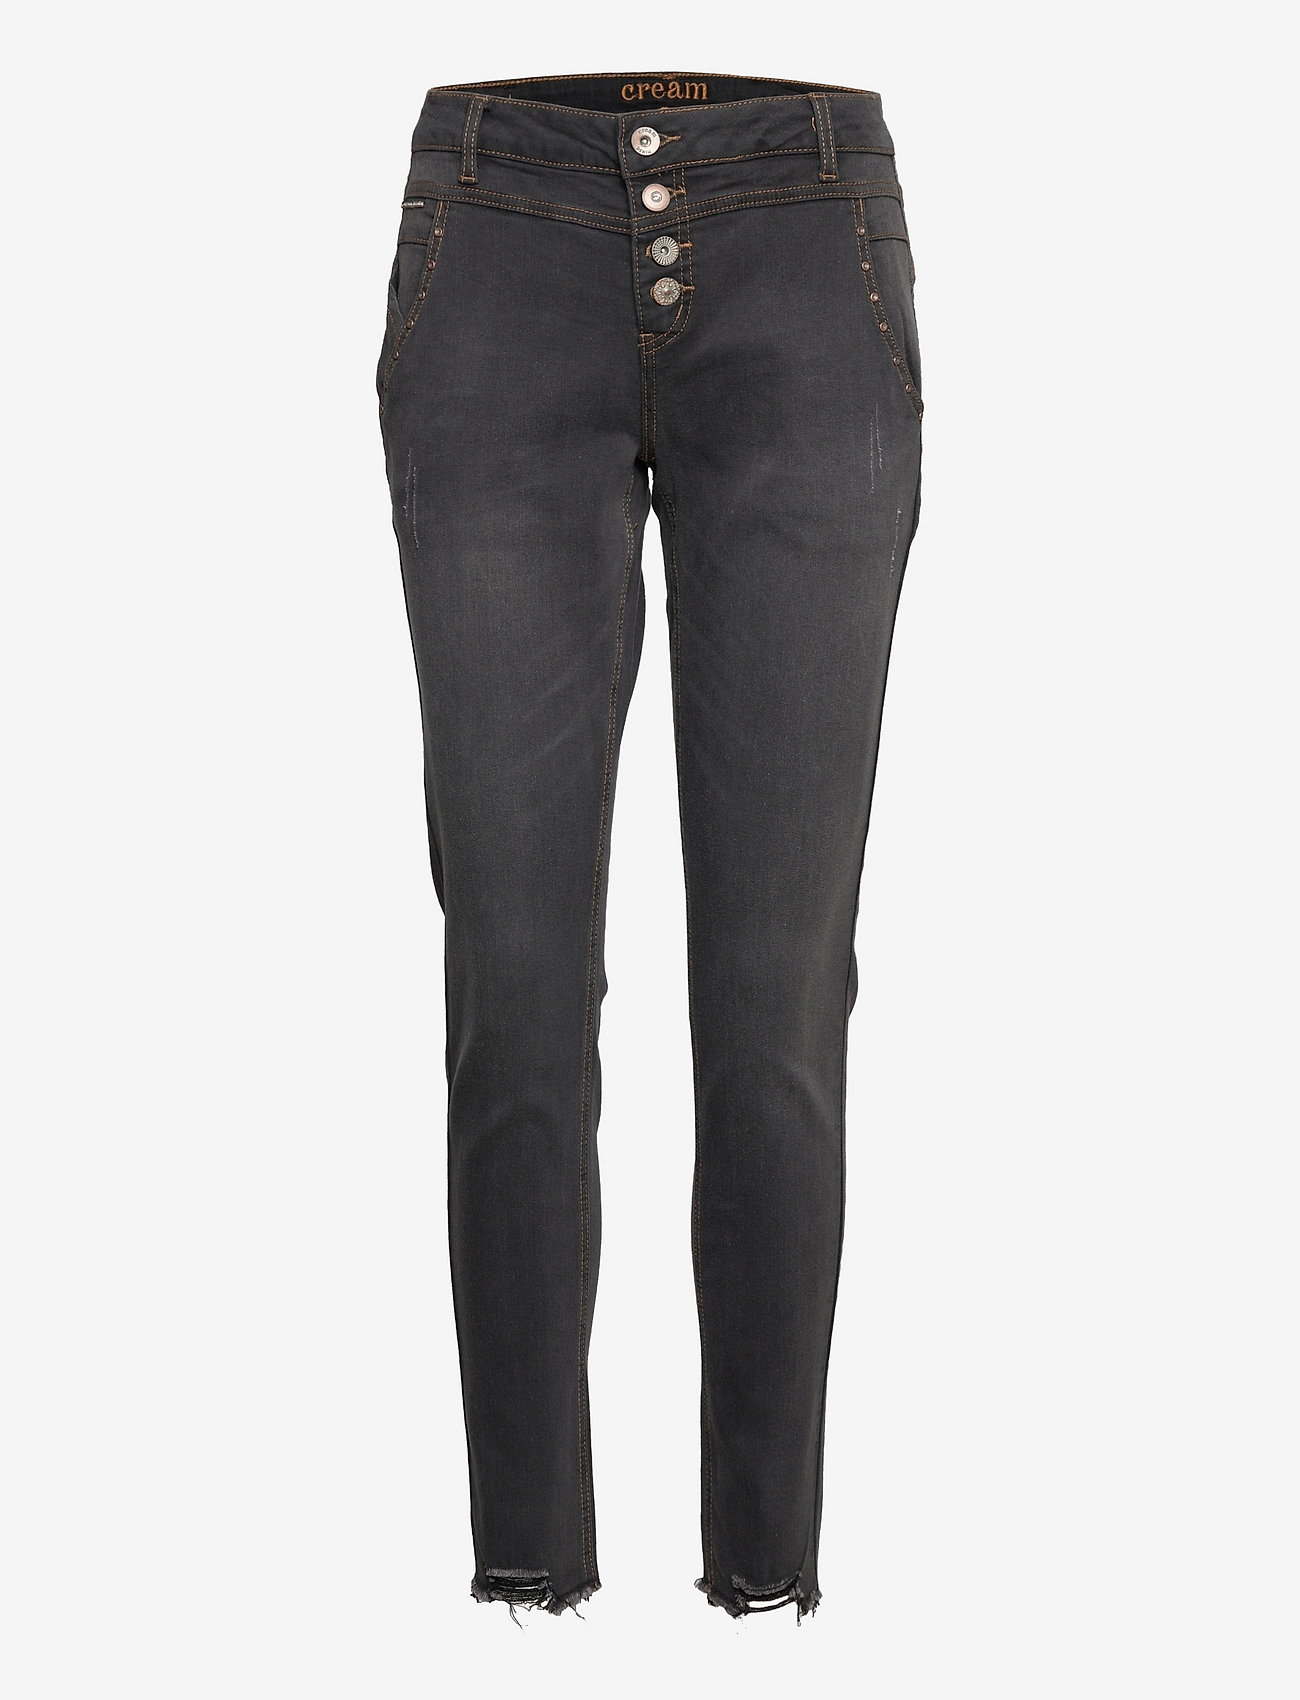 Cream - CRBerete Jeans - Baiily Fit - straight jeans - grey denim - 0